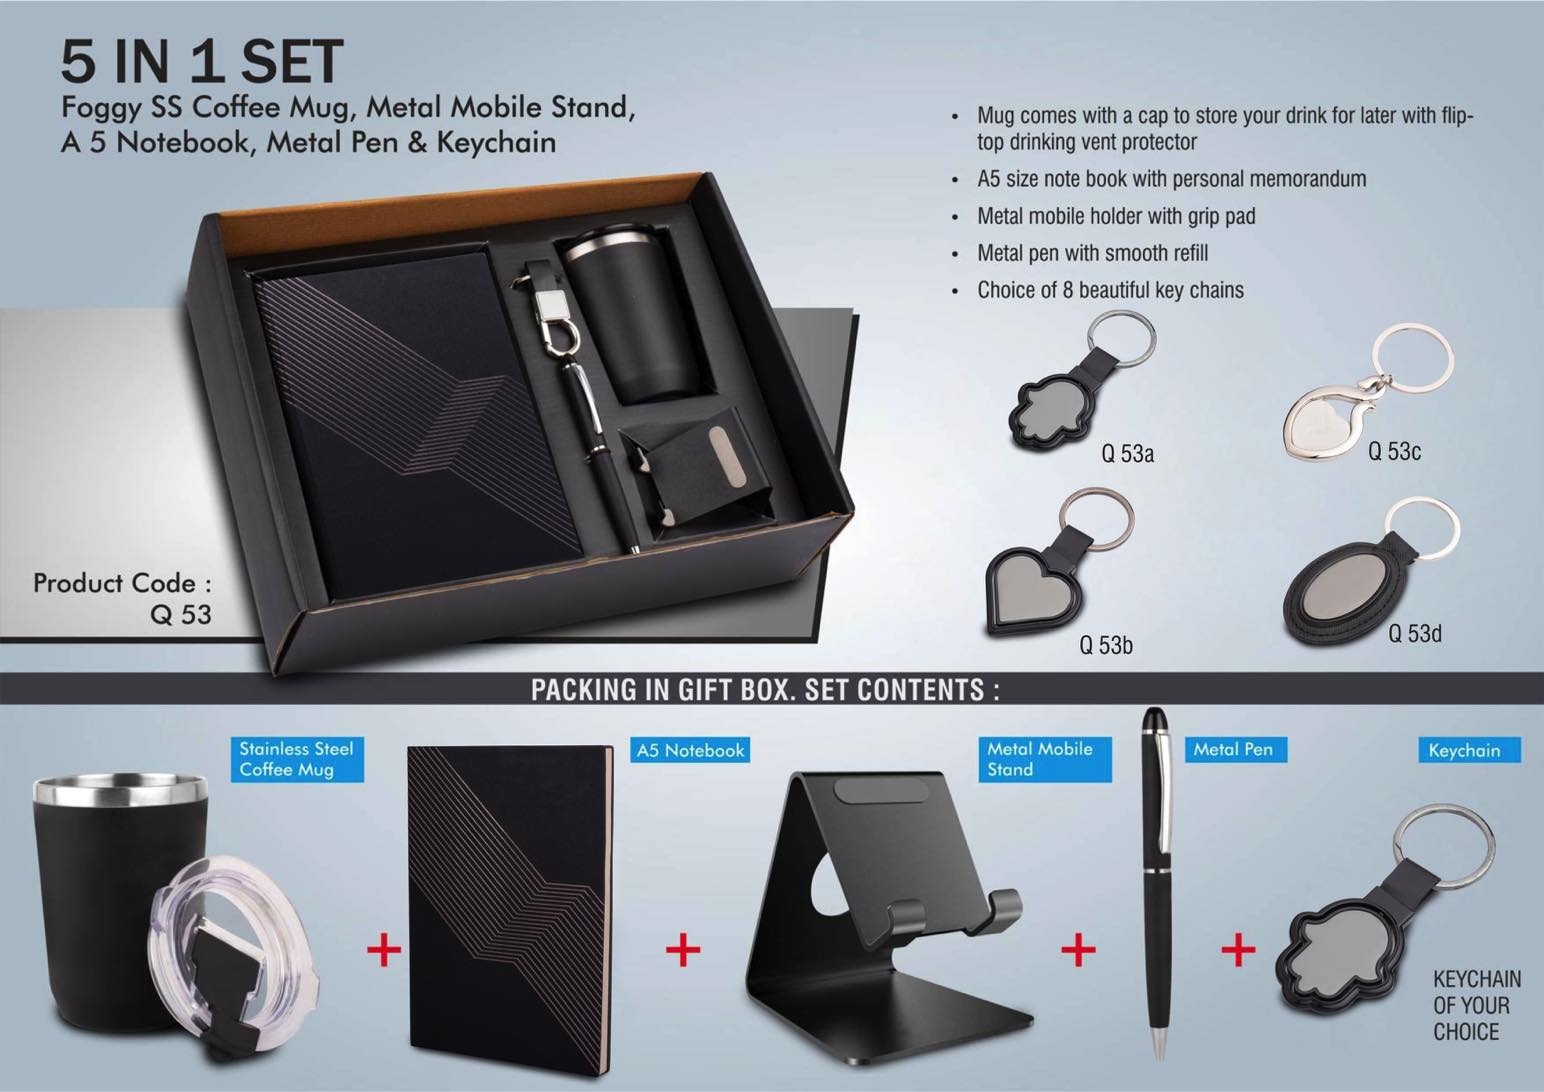 5 in 1 Set: Foggy SS Coffee Mug, Metal Pen, Metal Mobile Stand, A5 Notebook and Keychain: Black